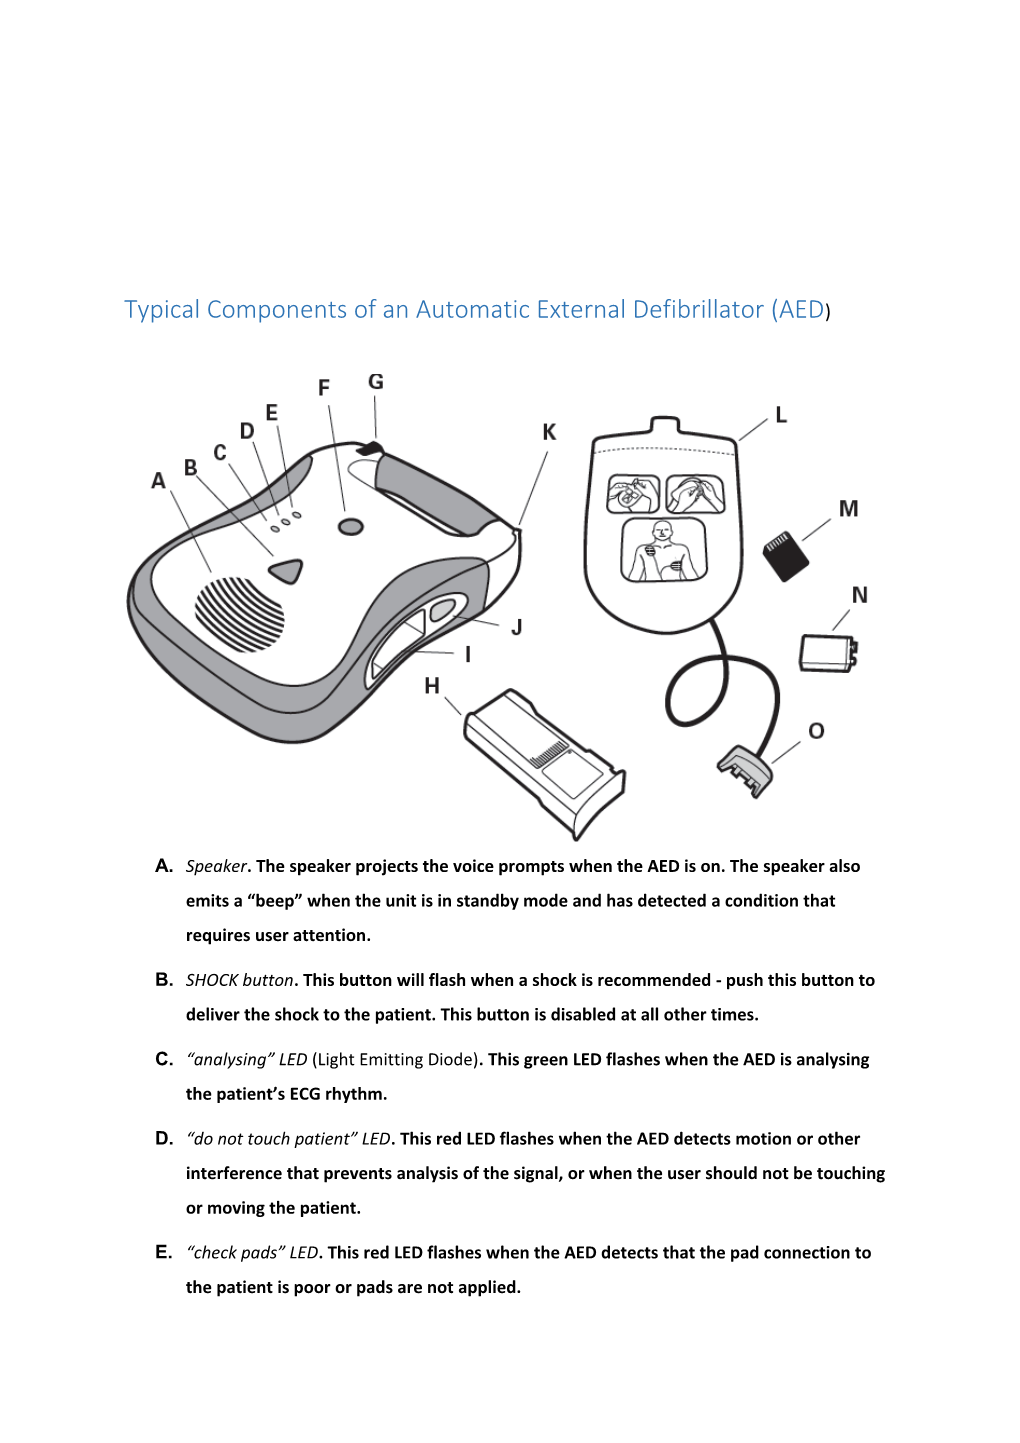 Typical Components of an Automatic External Defibrillator (AED)